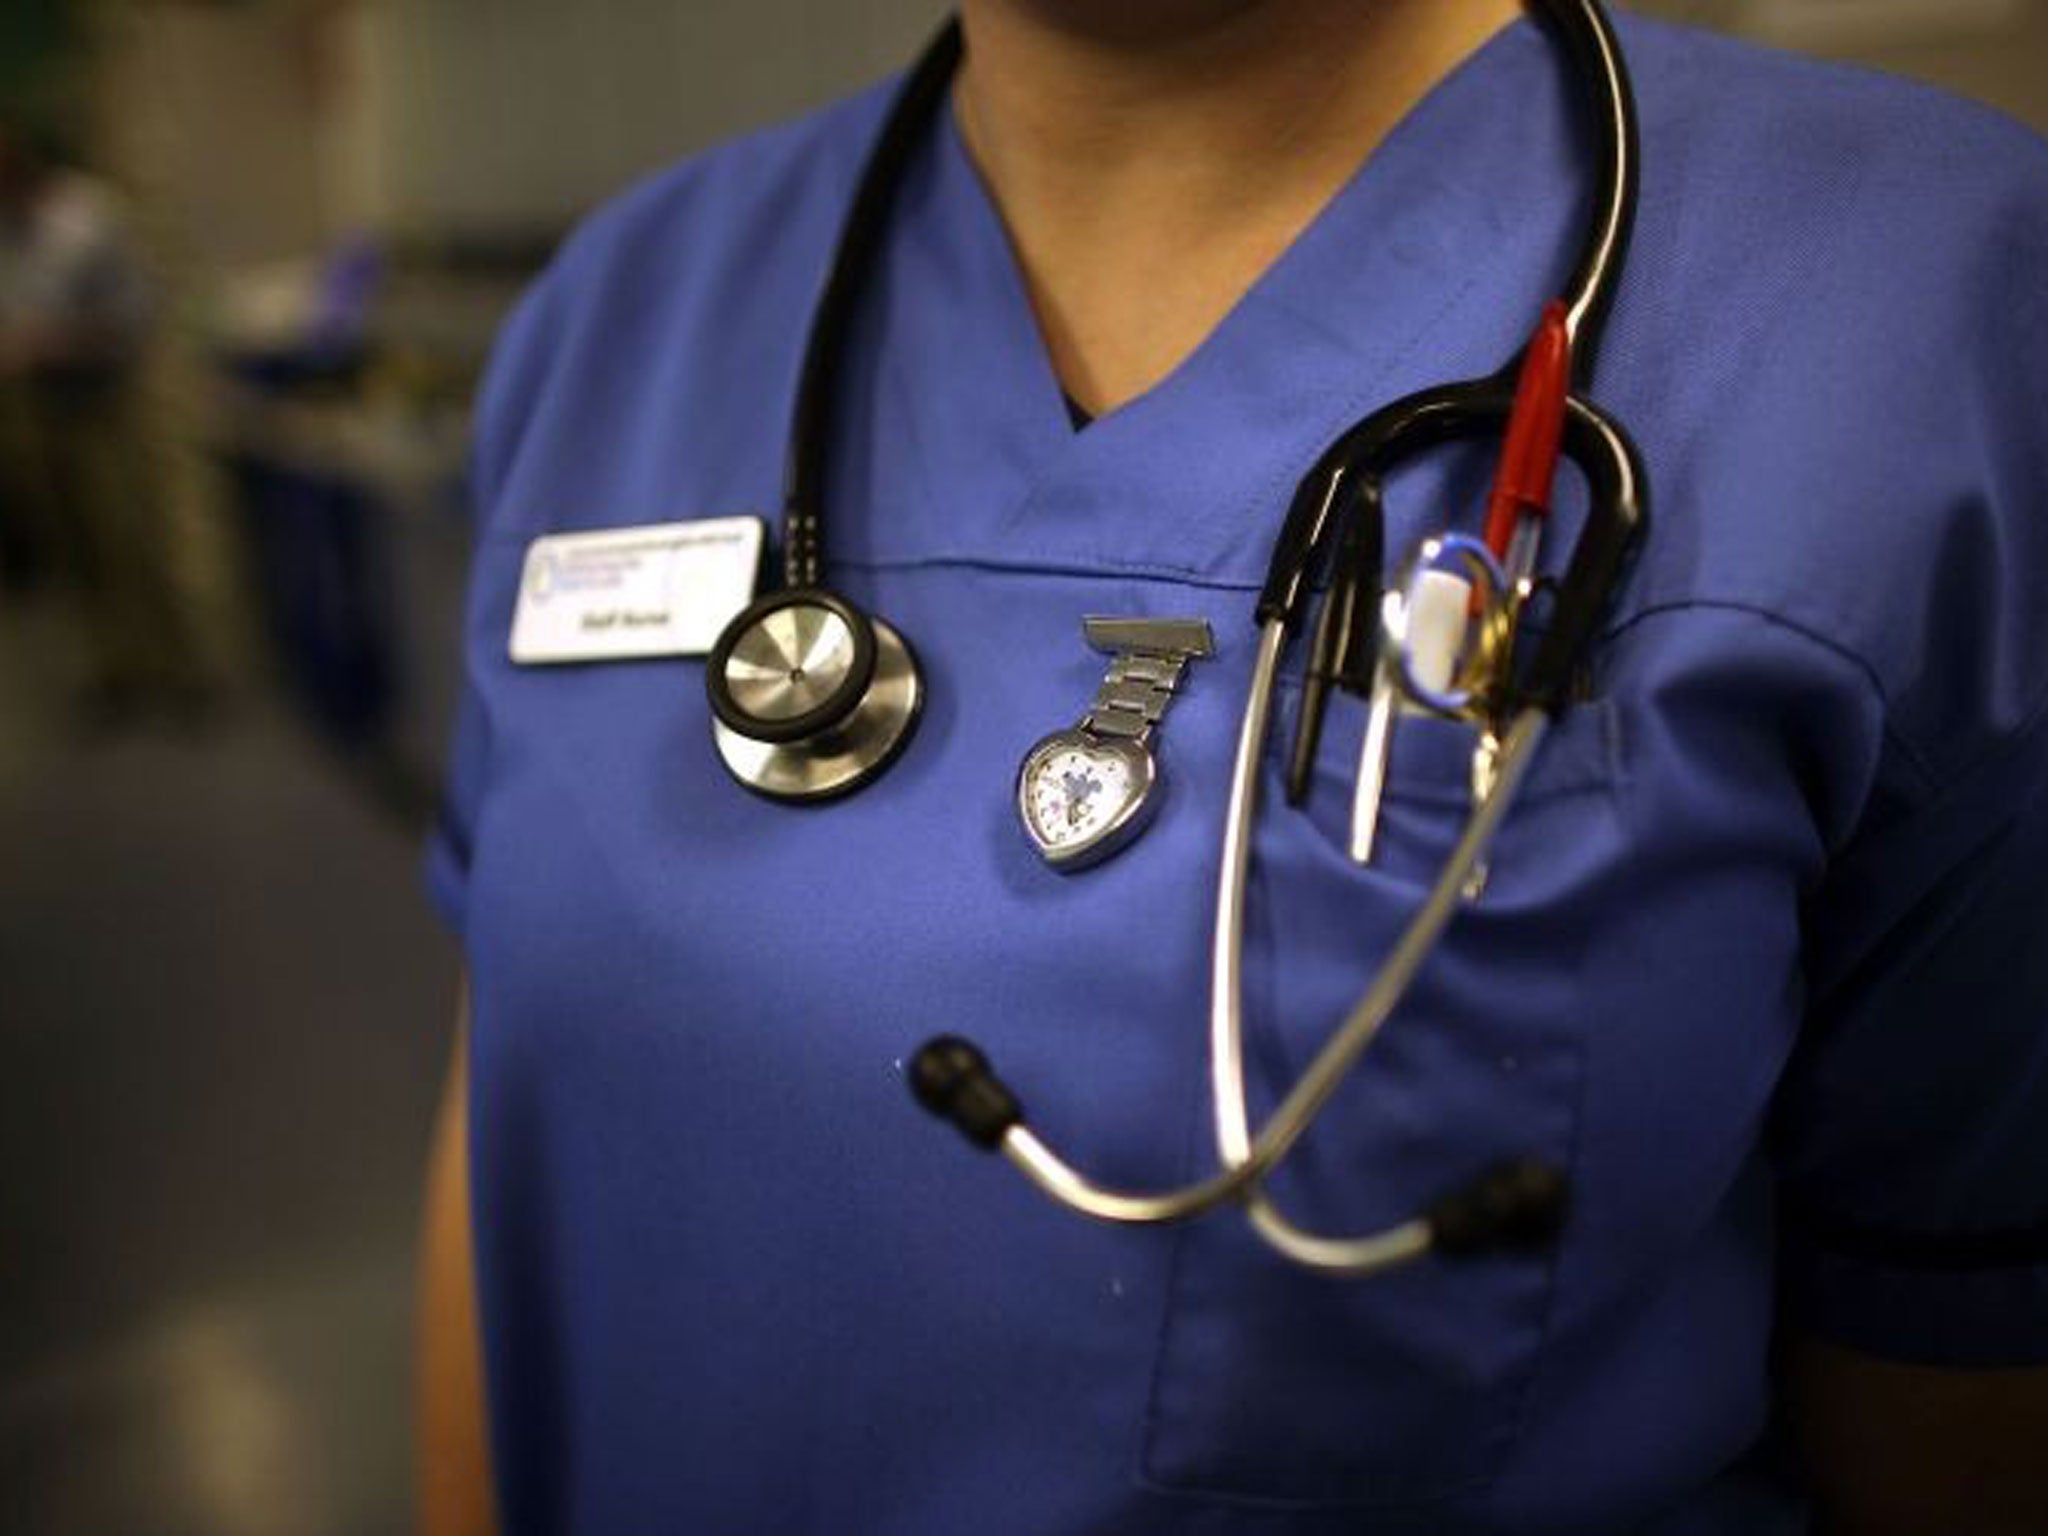 The Royal College of Nursing has said many frontline staff are struggling to pay household bills